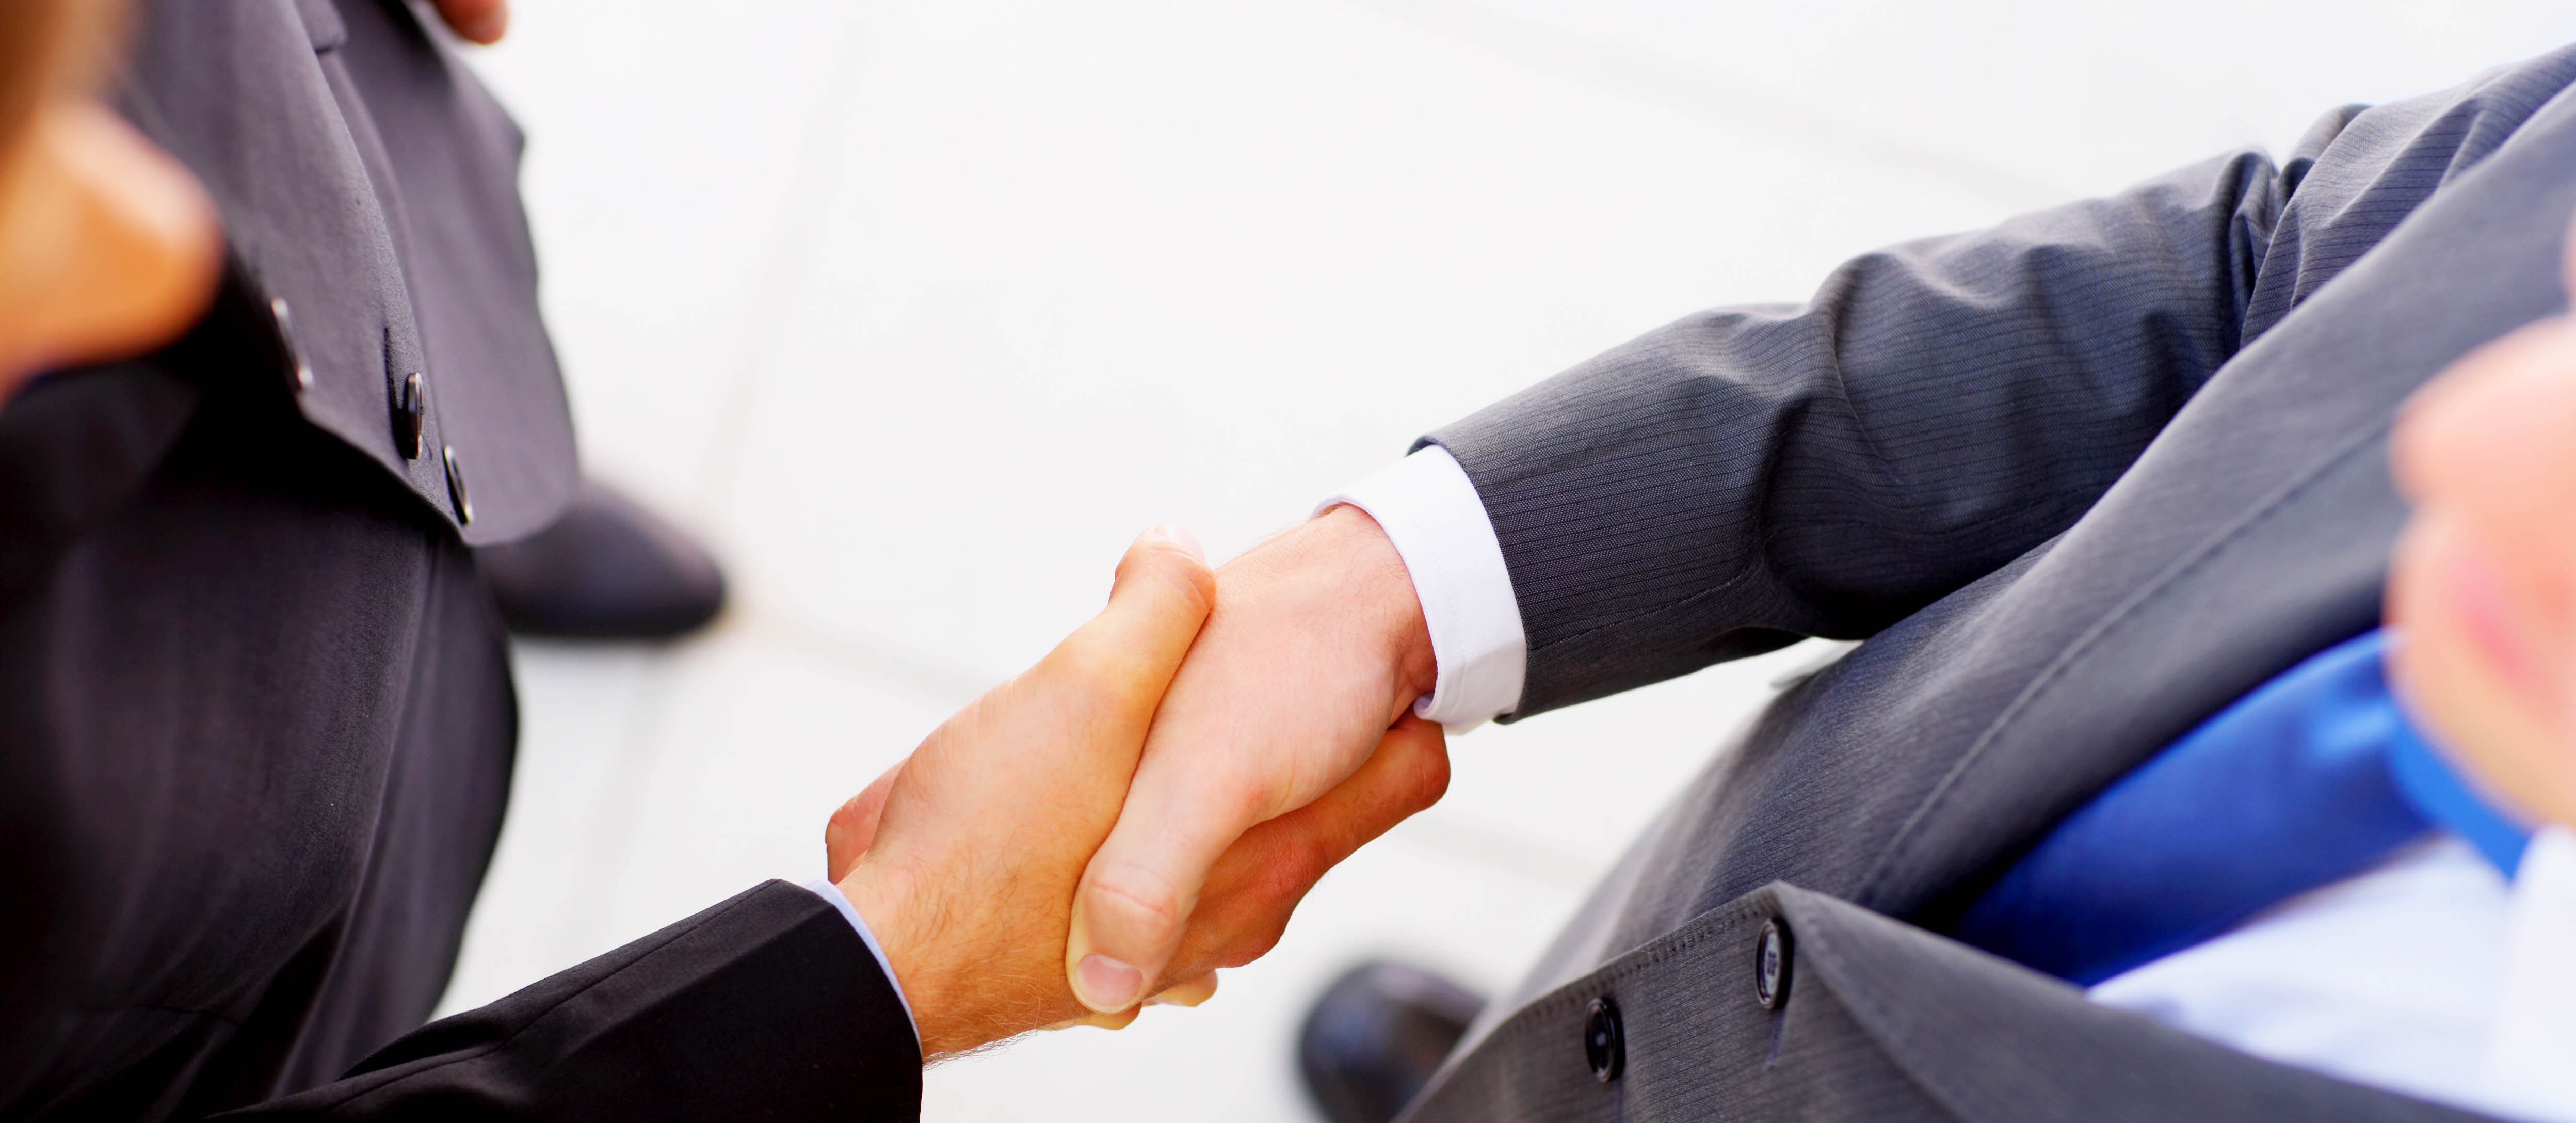 Businesspeople shaking hands, finishing up a meeting.